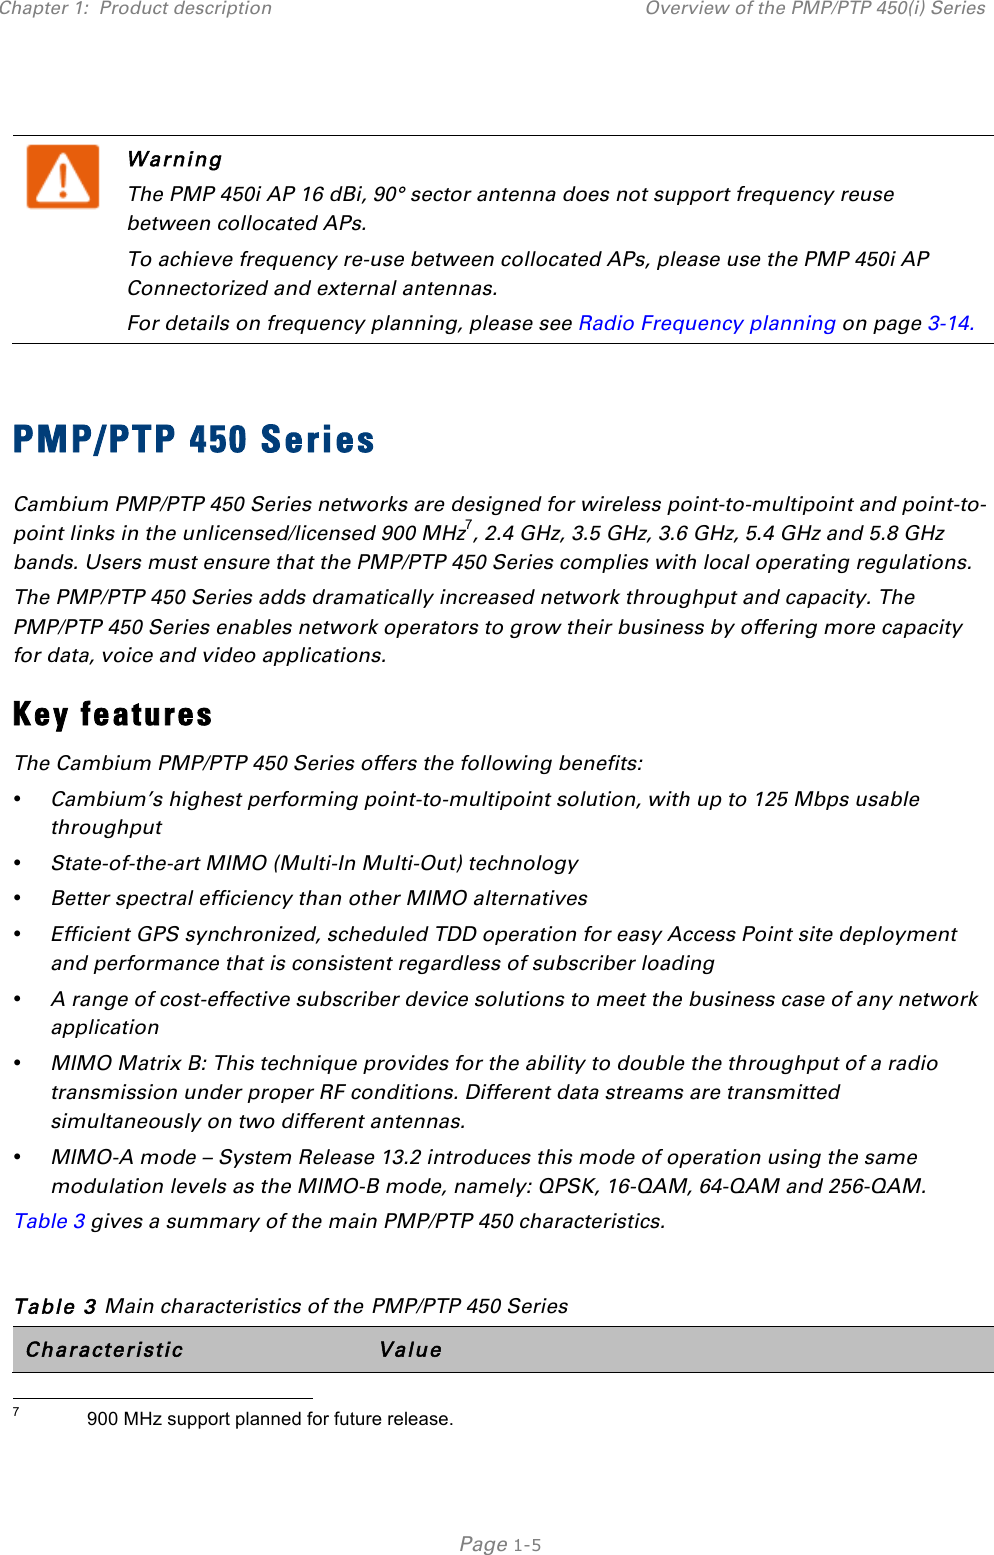 Chapter 1:  Product description Overview of the PMP/PTP 450(i) Series   Page 1-5    Warning The PMP 450i AP 16 dBi, 90° sector antenna does not support frequency reuse between collocated APs. To achieve frequency re-use between collocated APs, please use the PMP 450i AP Connectorized and external antennas. For details on frequency planning, please see Radio Frequency planning on page 3-14.  PMP/PTP 450 Series Cambium PMP/PTP 450 Series networks are designed for wireless point-to-multipoint and point-to-point links in the unlicensed/licensed 900 MHz7, 2.4 GHz, 3.5 GHz, 3.6 GHz, 5.4 GHz and 5.8 GHz bands. Users must ensure that the PMP/PTP 450 Series complies with local operating regulations.  The PMP/PTP 450 Series adds dramatically increased network throughput and capacity. The PMP/PTP 450 Series enables network operators to grow their business by offering more capacity for data, voice and video applications. Key features The Cambium PMP/PTP 450 Series offers the following benefits:  • Cambium’s highest performing point-to-multipoint solution, with up to 125 Mbps usable throughput  • State-of-the-art MIMO (Multi-In Multi-Out) technology  • Better spectral efficiency than other MIMO alternatives  • Efficient GPS synchronized, scheduled TDD operation for easy Access Point site deployment and performance that is consistent regardless of subscriber loading  • A range of cost-effective subscriber device solutions to meet the business case of any network application  • MIMO Matrix B: This technique provides for the ability to double the throughput of a radio transmission under proper RF conditions. Different data streams are transmitted simultaneously on two different antennas.  • MIMO-A mode – System Release 13.2 introduces this mode of operation using the same modulation levels as the MIMO-B mode, namely: QPSK, 16-QAM, 64-QAM and 256-QAM.  Table 3 gives a summary of the main PMP/PTP 450 characteristics.  Table 3 Main characteristics of the PMP/PTP 450 Series Characteristic Value                                                 7             900 MHz support planned for future release. 